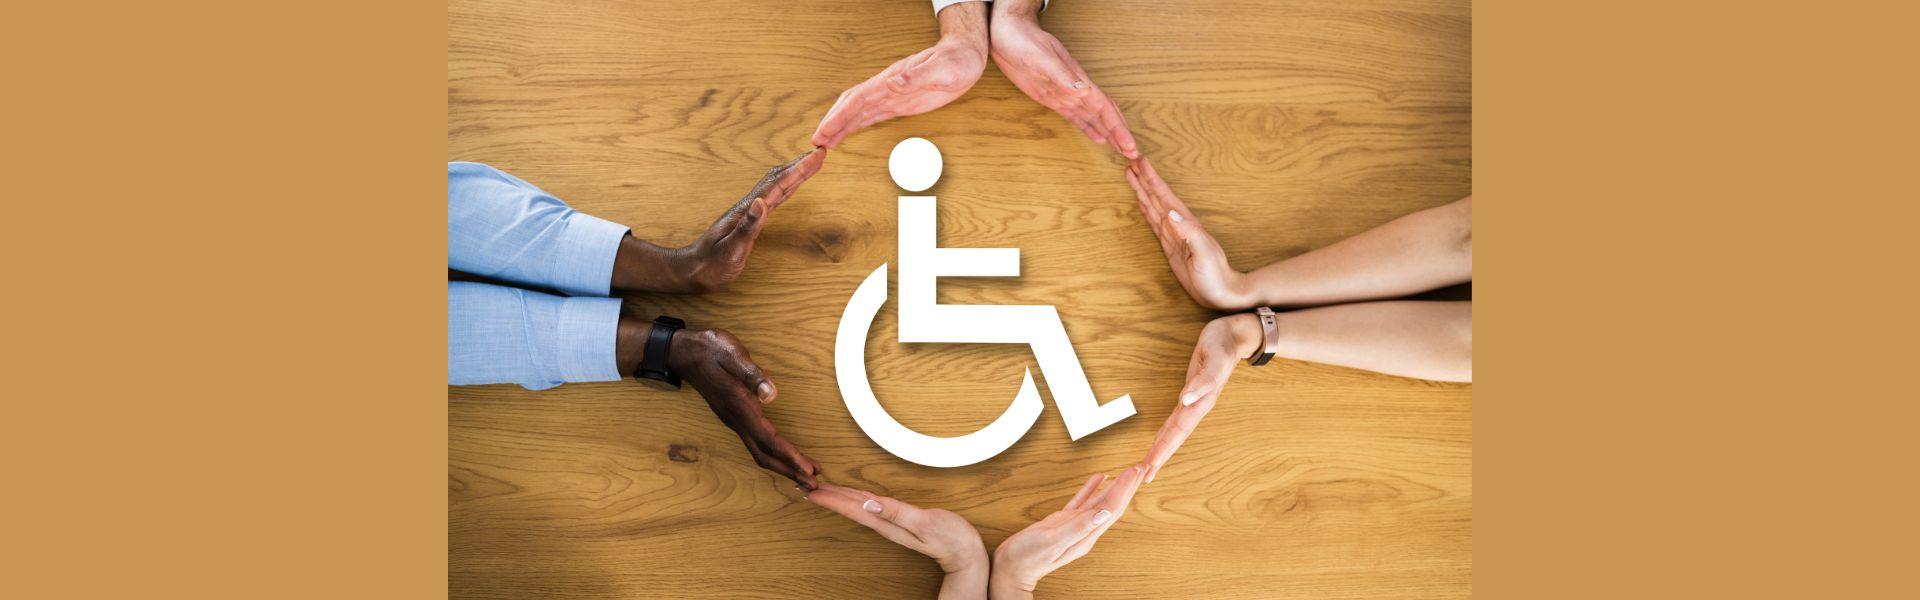 Accessibility symbol surrounded by racially diverse hands